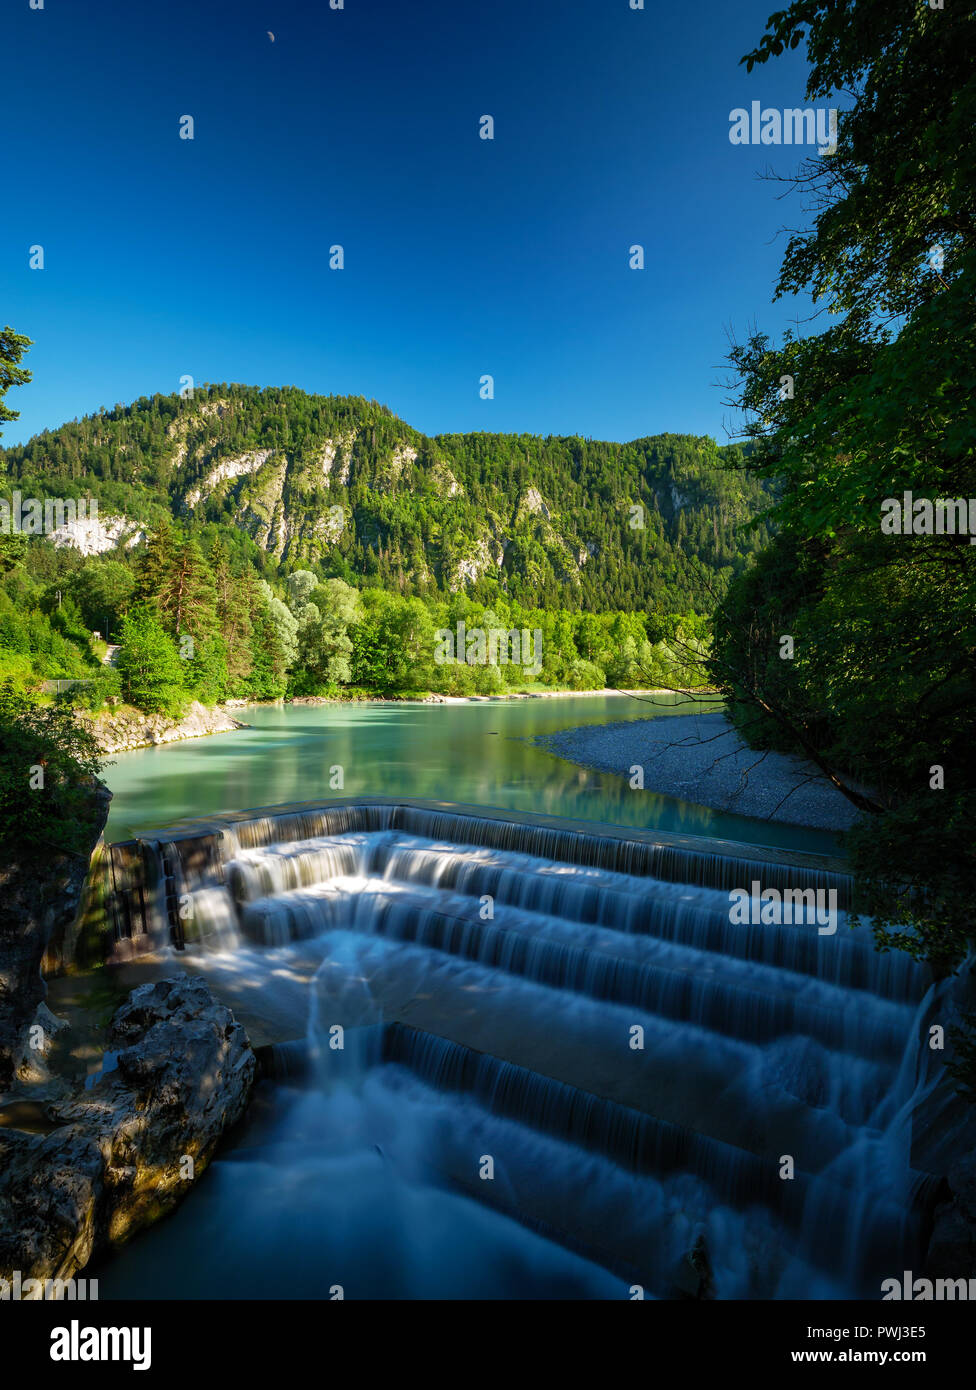 Lechfall in Germany Pfronten Füssen. Waterfall with steps and a blue sky with the moon in the Background. Also some green trees you can see. Stock Photo